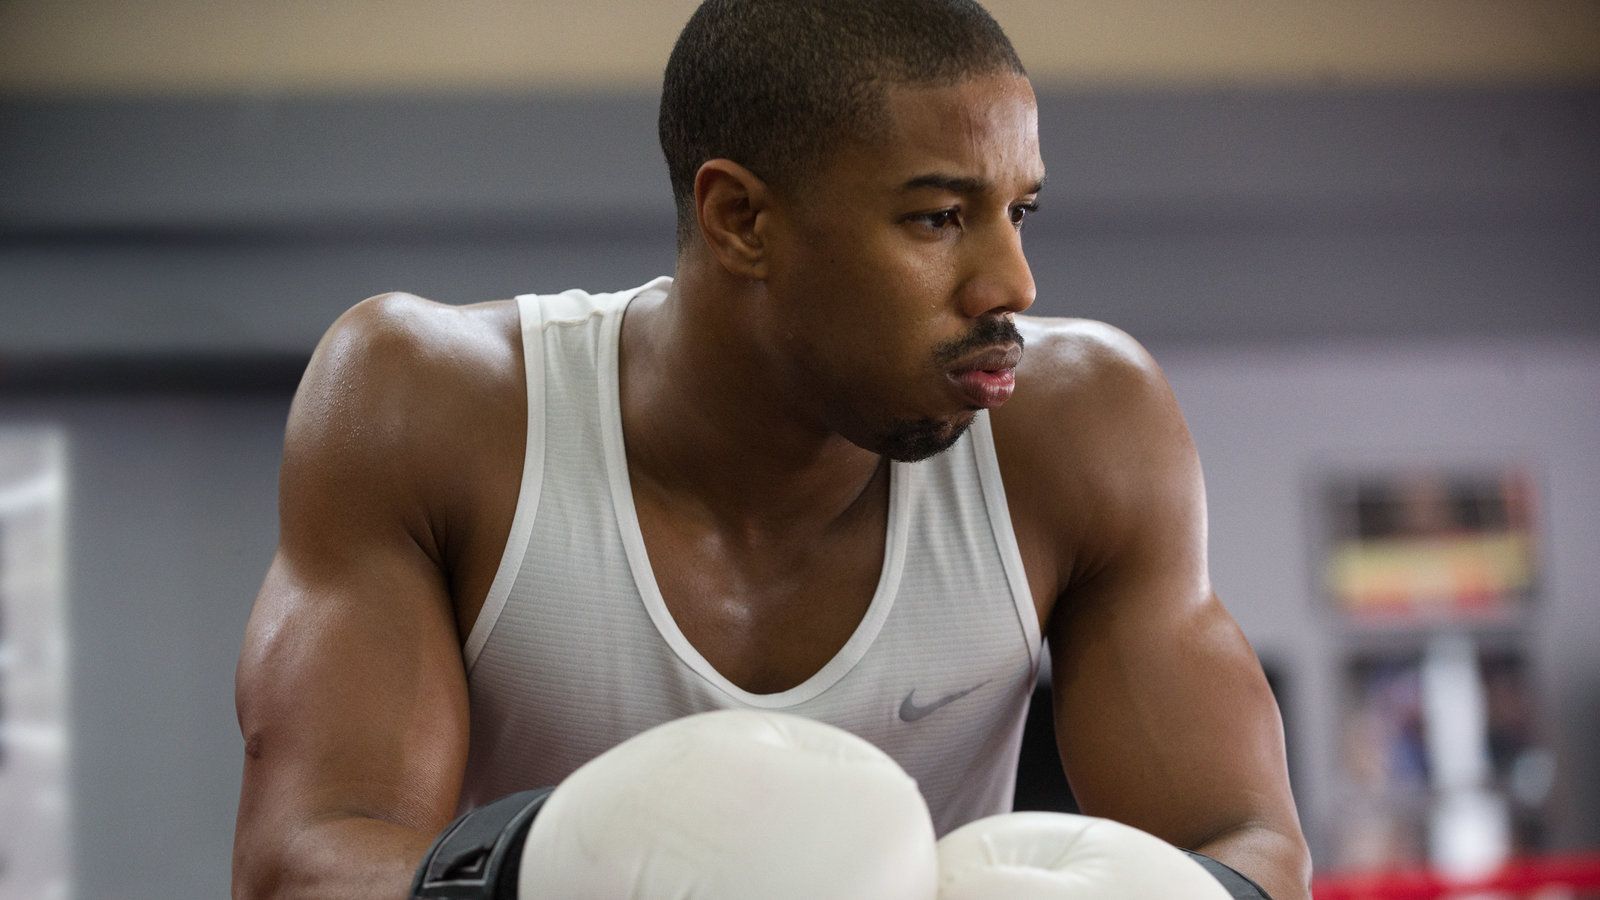 What's on TV Friday: 'Creed' and 'First Reformed'